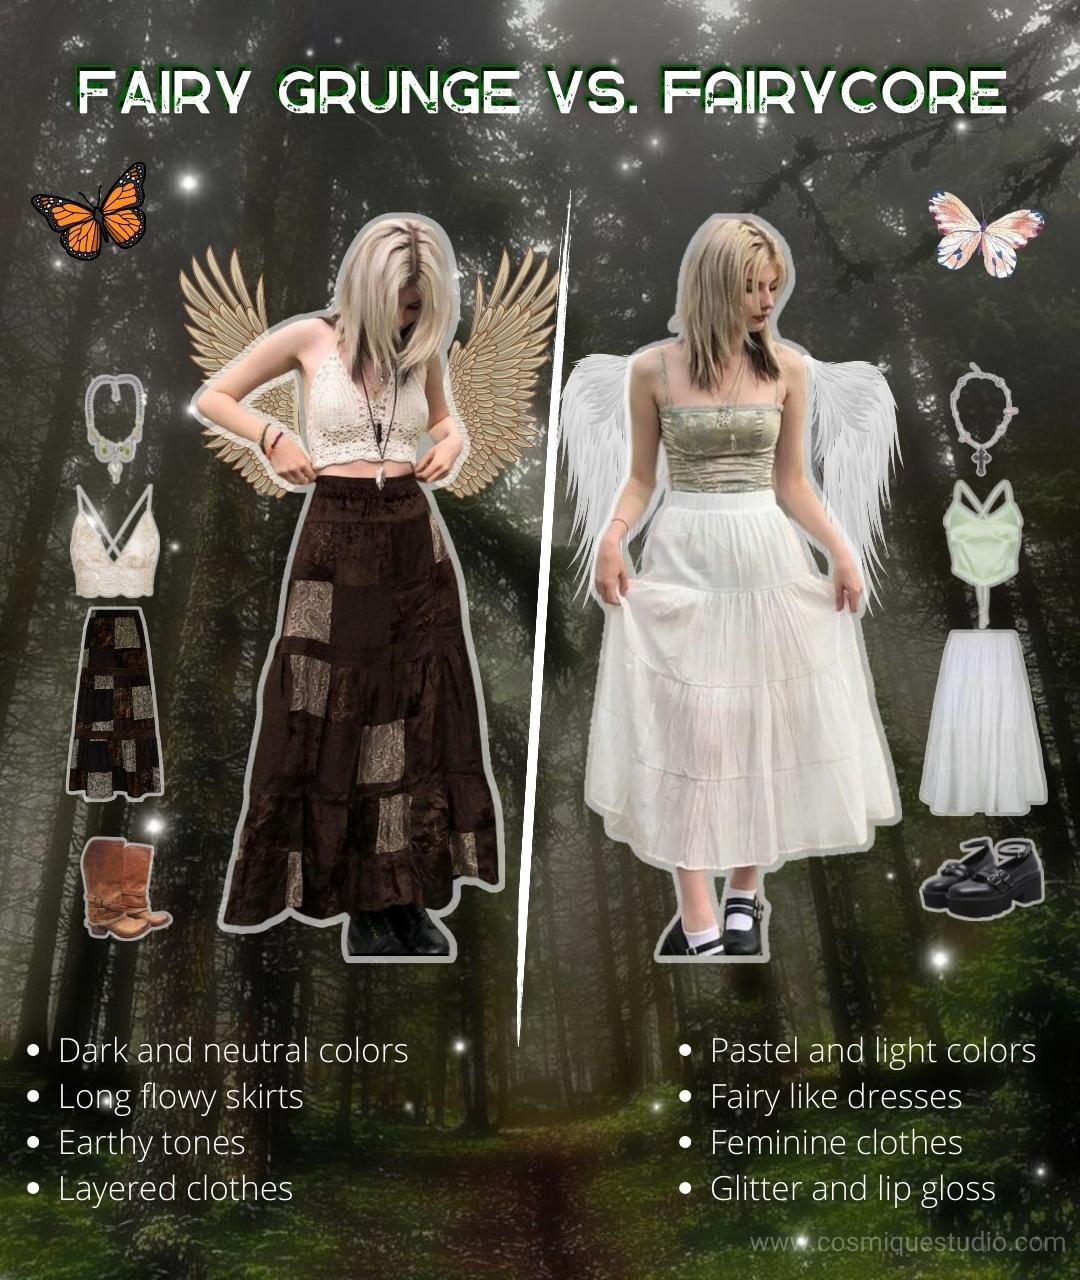 The difference between fairy grunge and fairycore, and girls wearing outfits and accessories of both.